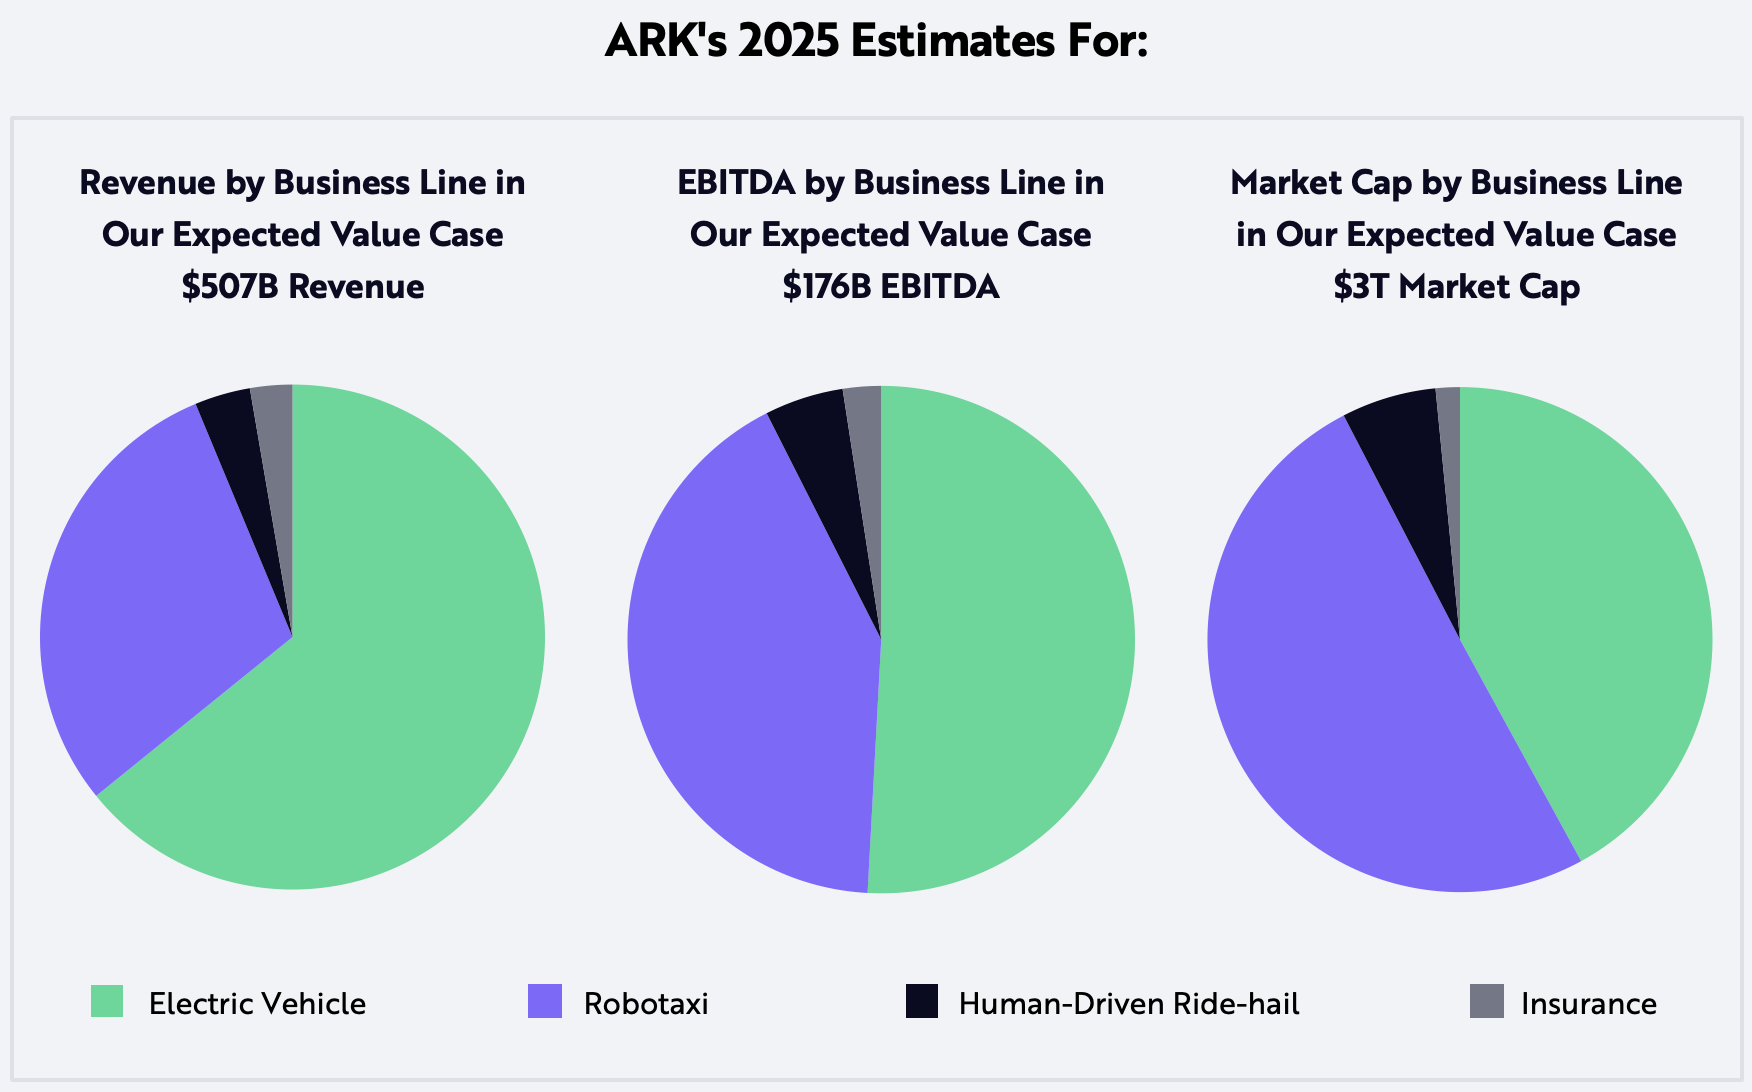 ARK’s Price Target for Tesla in 2025 is 3,000 Per Share